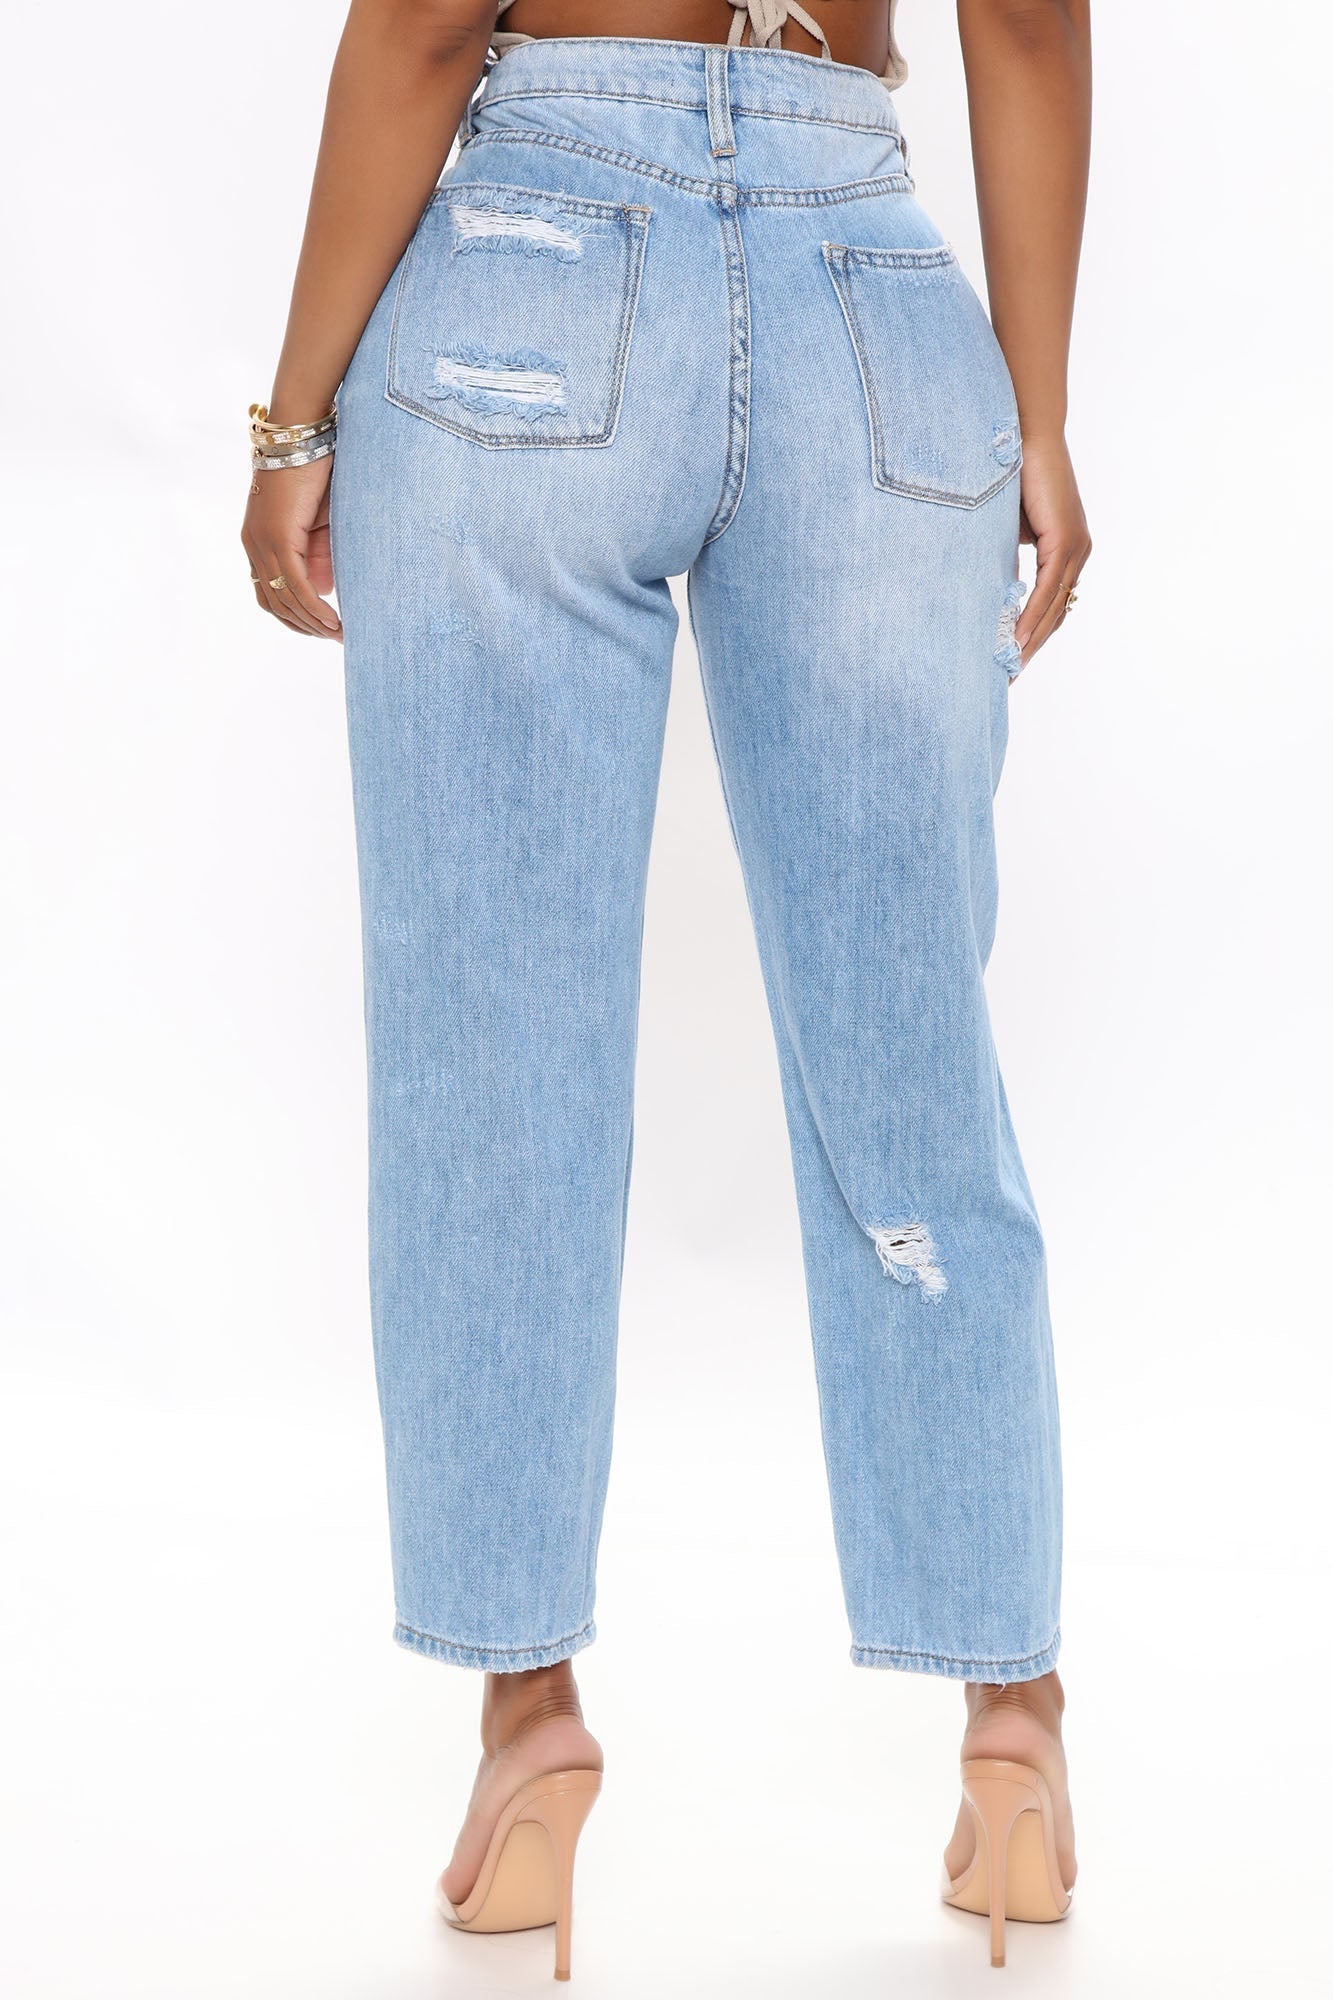 Why Don't You Relax Ripped Mom Jeans - Medium Blue Wash